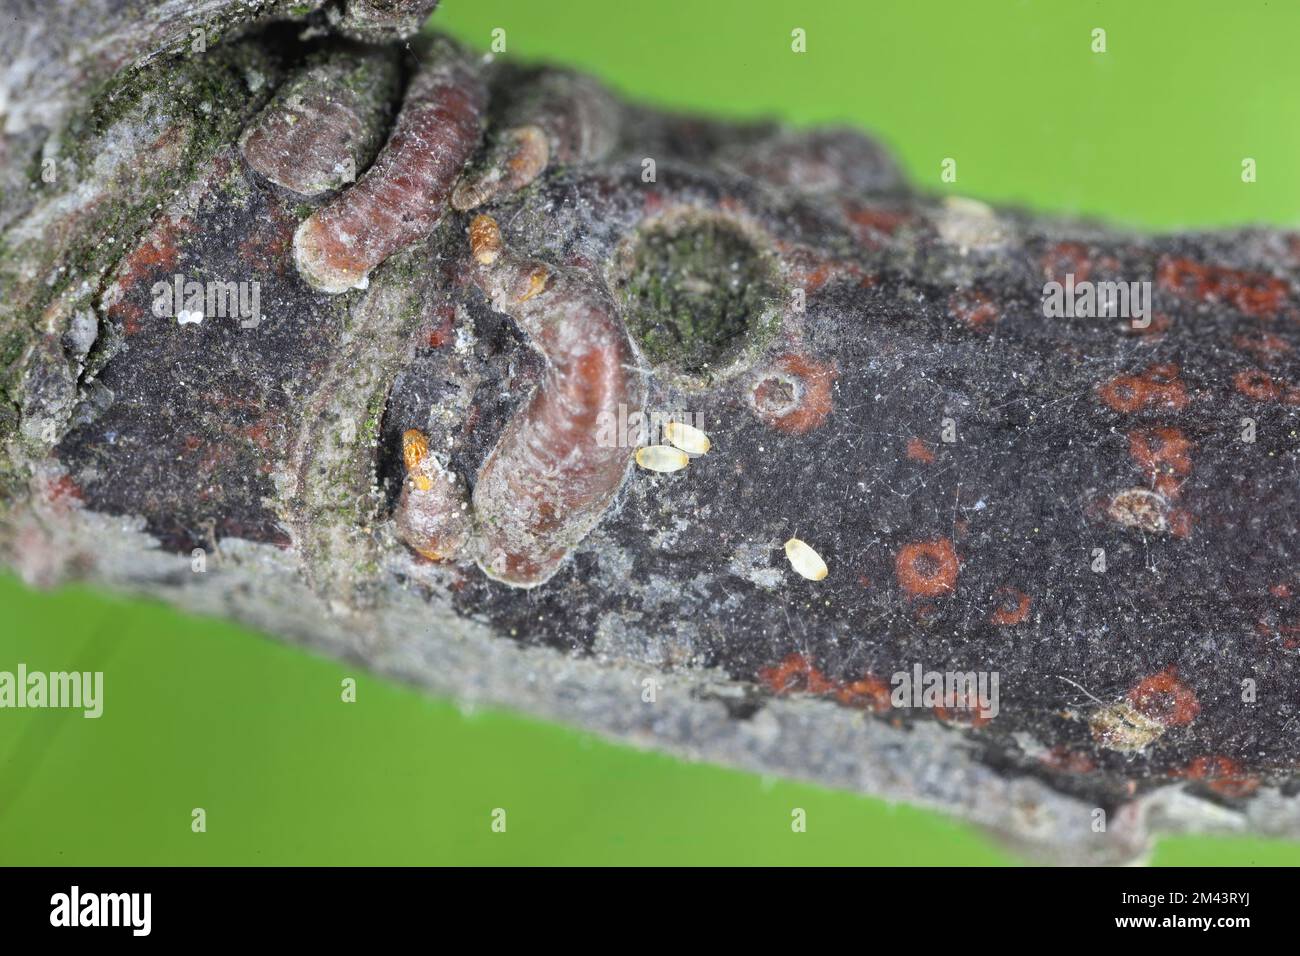 Adult female apple mussel scale or oystershell scale (Lepidosaphes ulmi) on the surface of an apple bark. Stock Photo